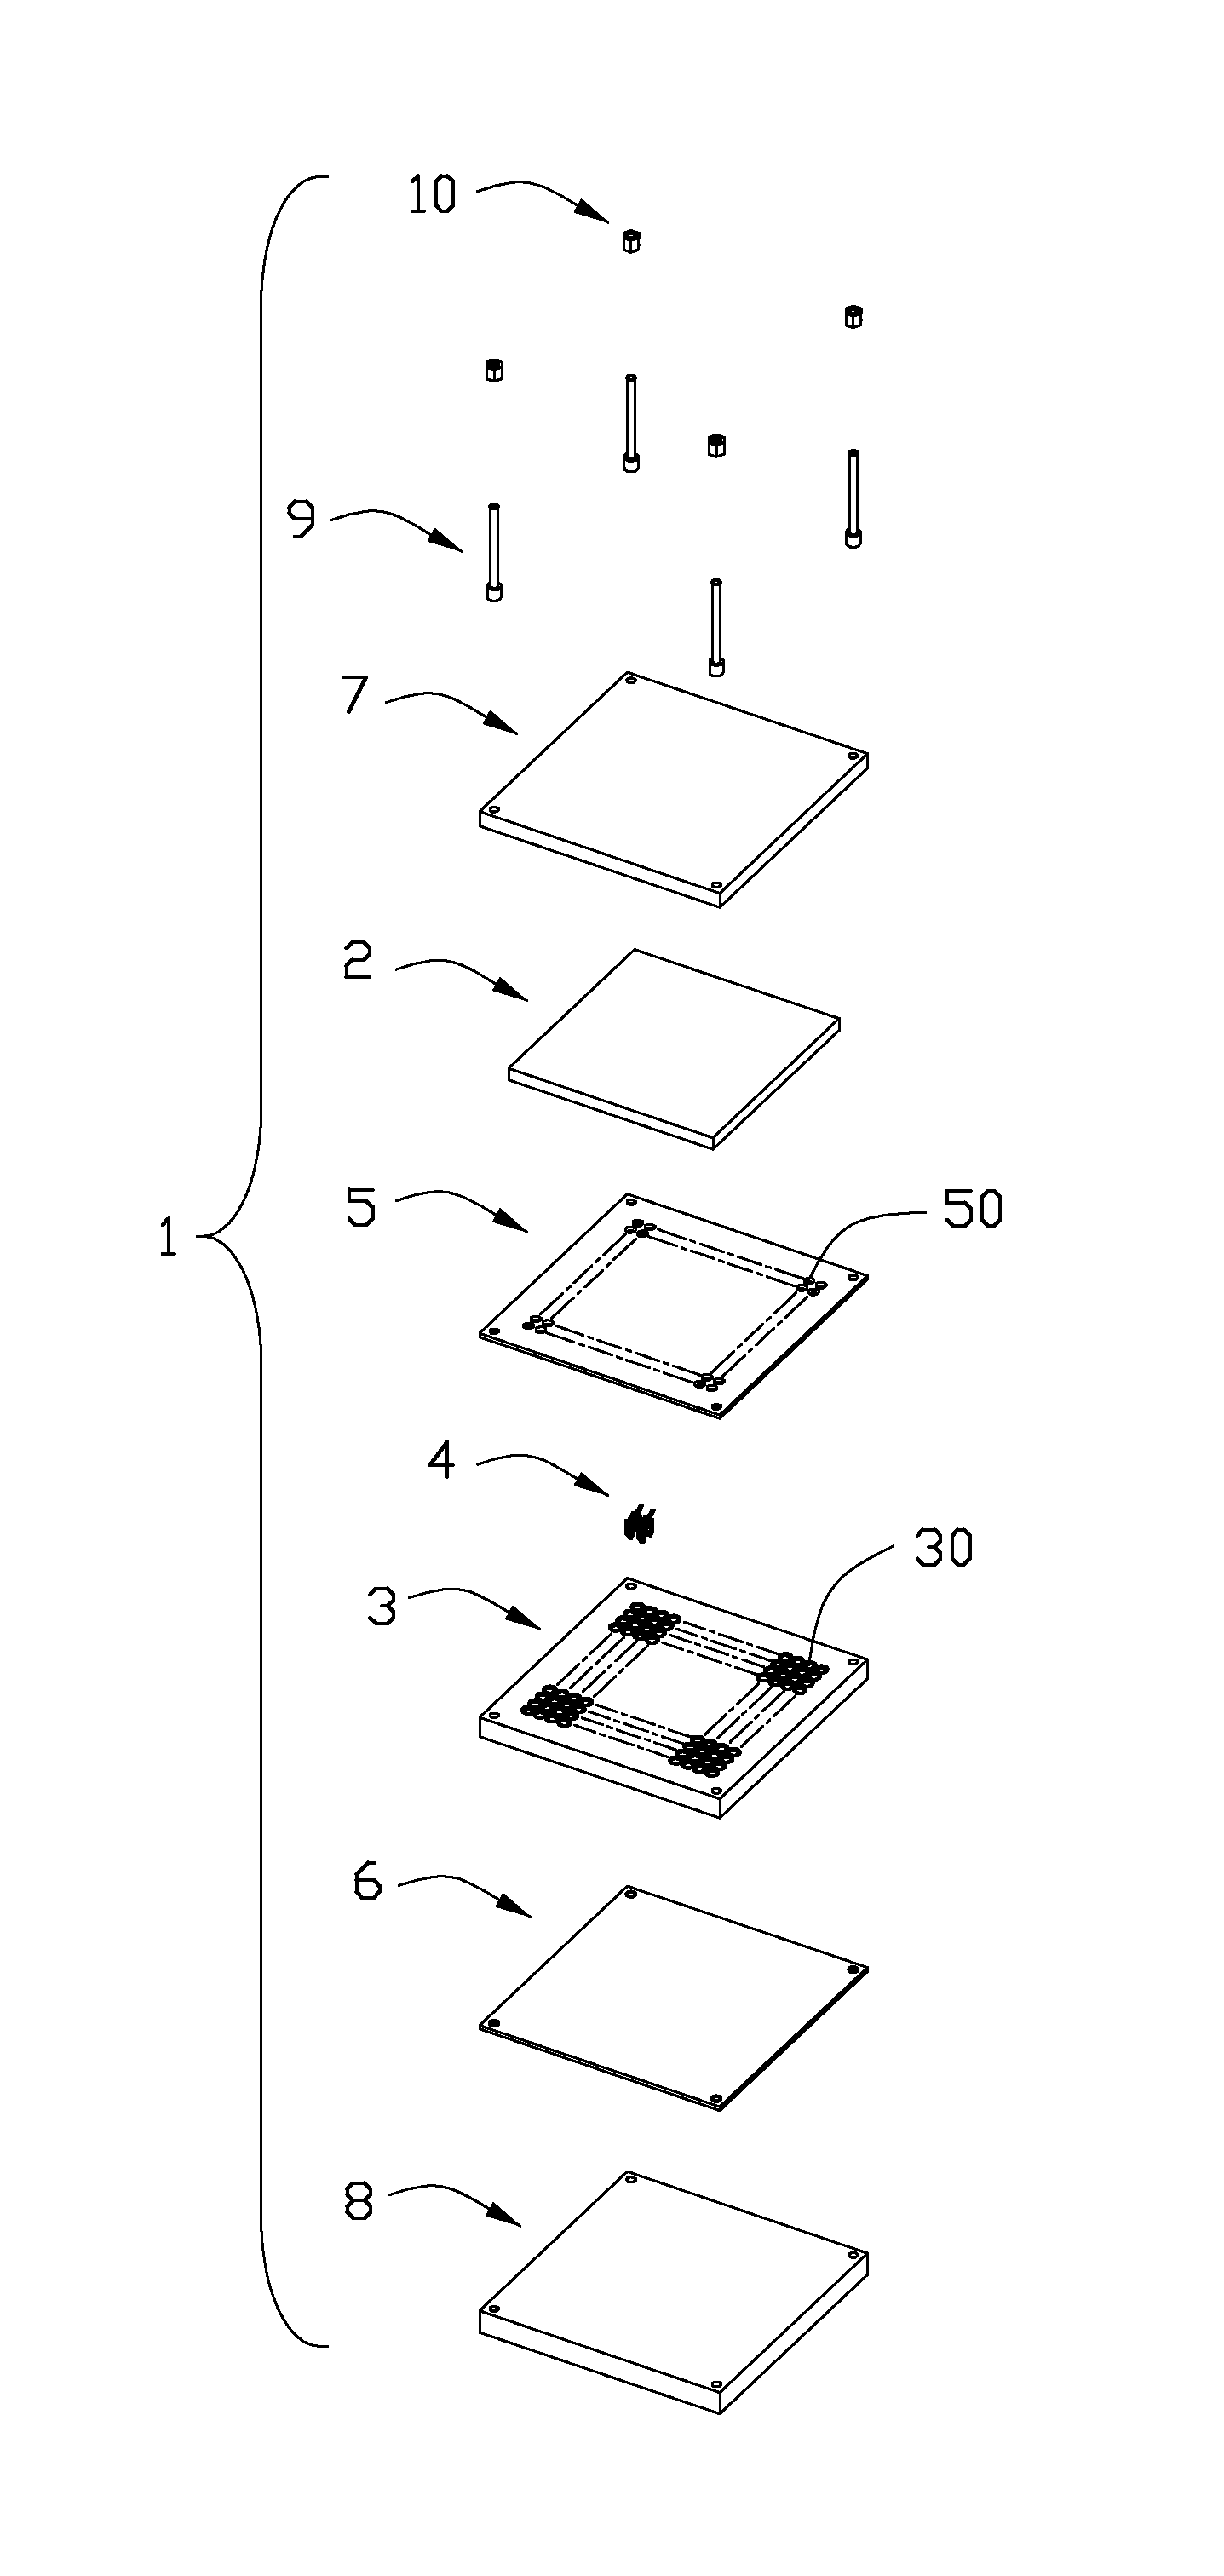 Electrical connection arrangement having PCB with contacts received therein